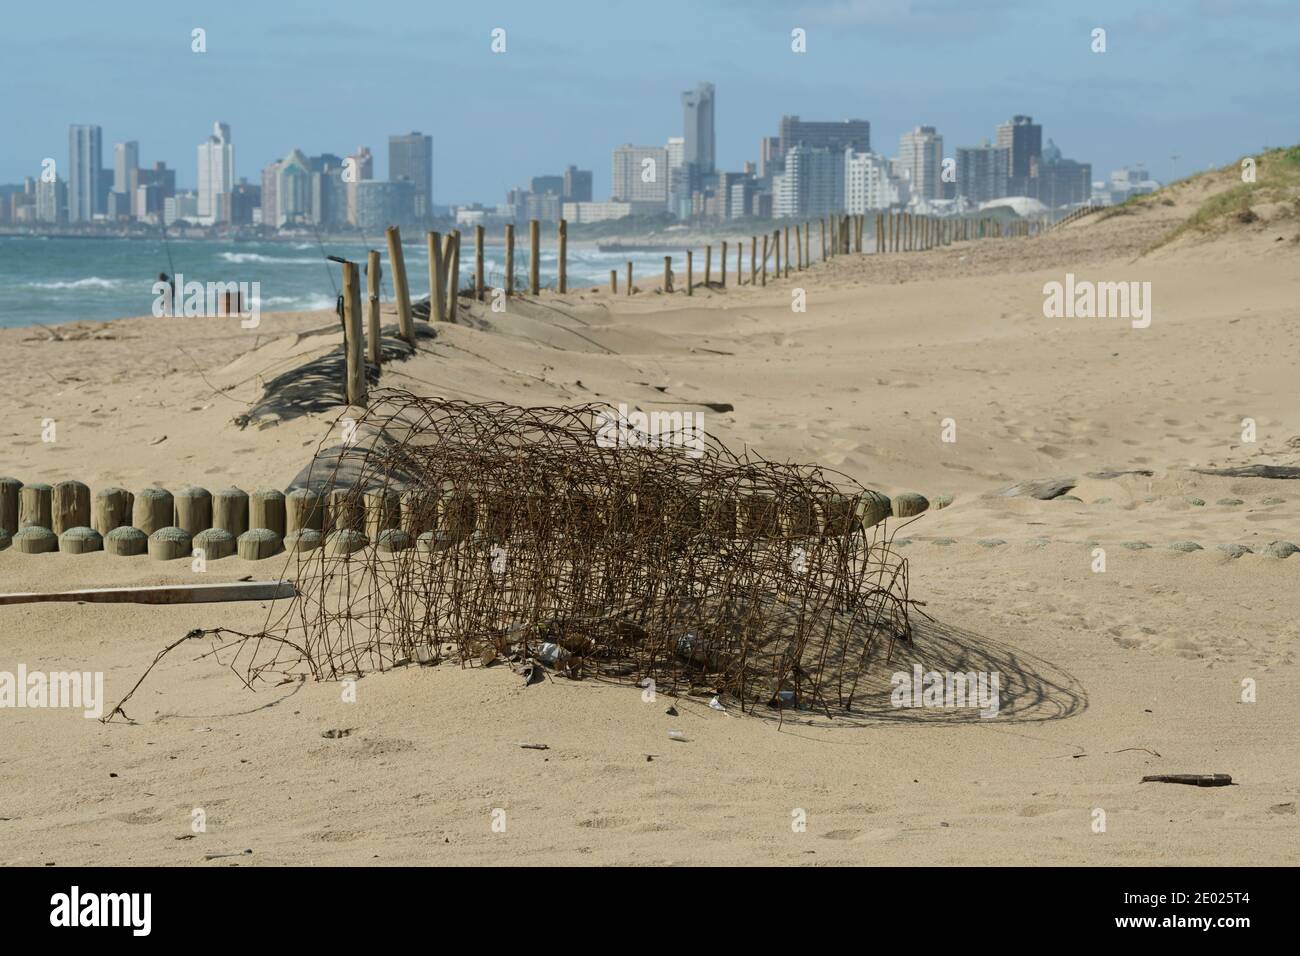 Landscape, urban decay, roll of rusting wire fence, infrastructure neglect, beach management, Durban, KwaZulu-Natal, South Africa, city skyline Stock Photo